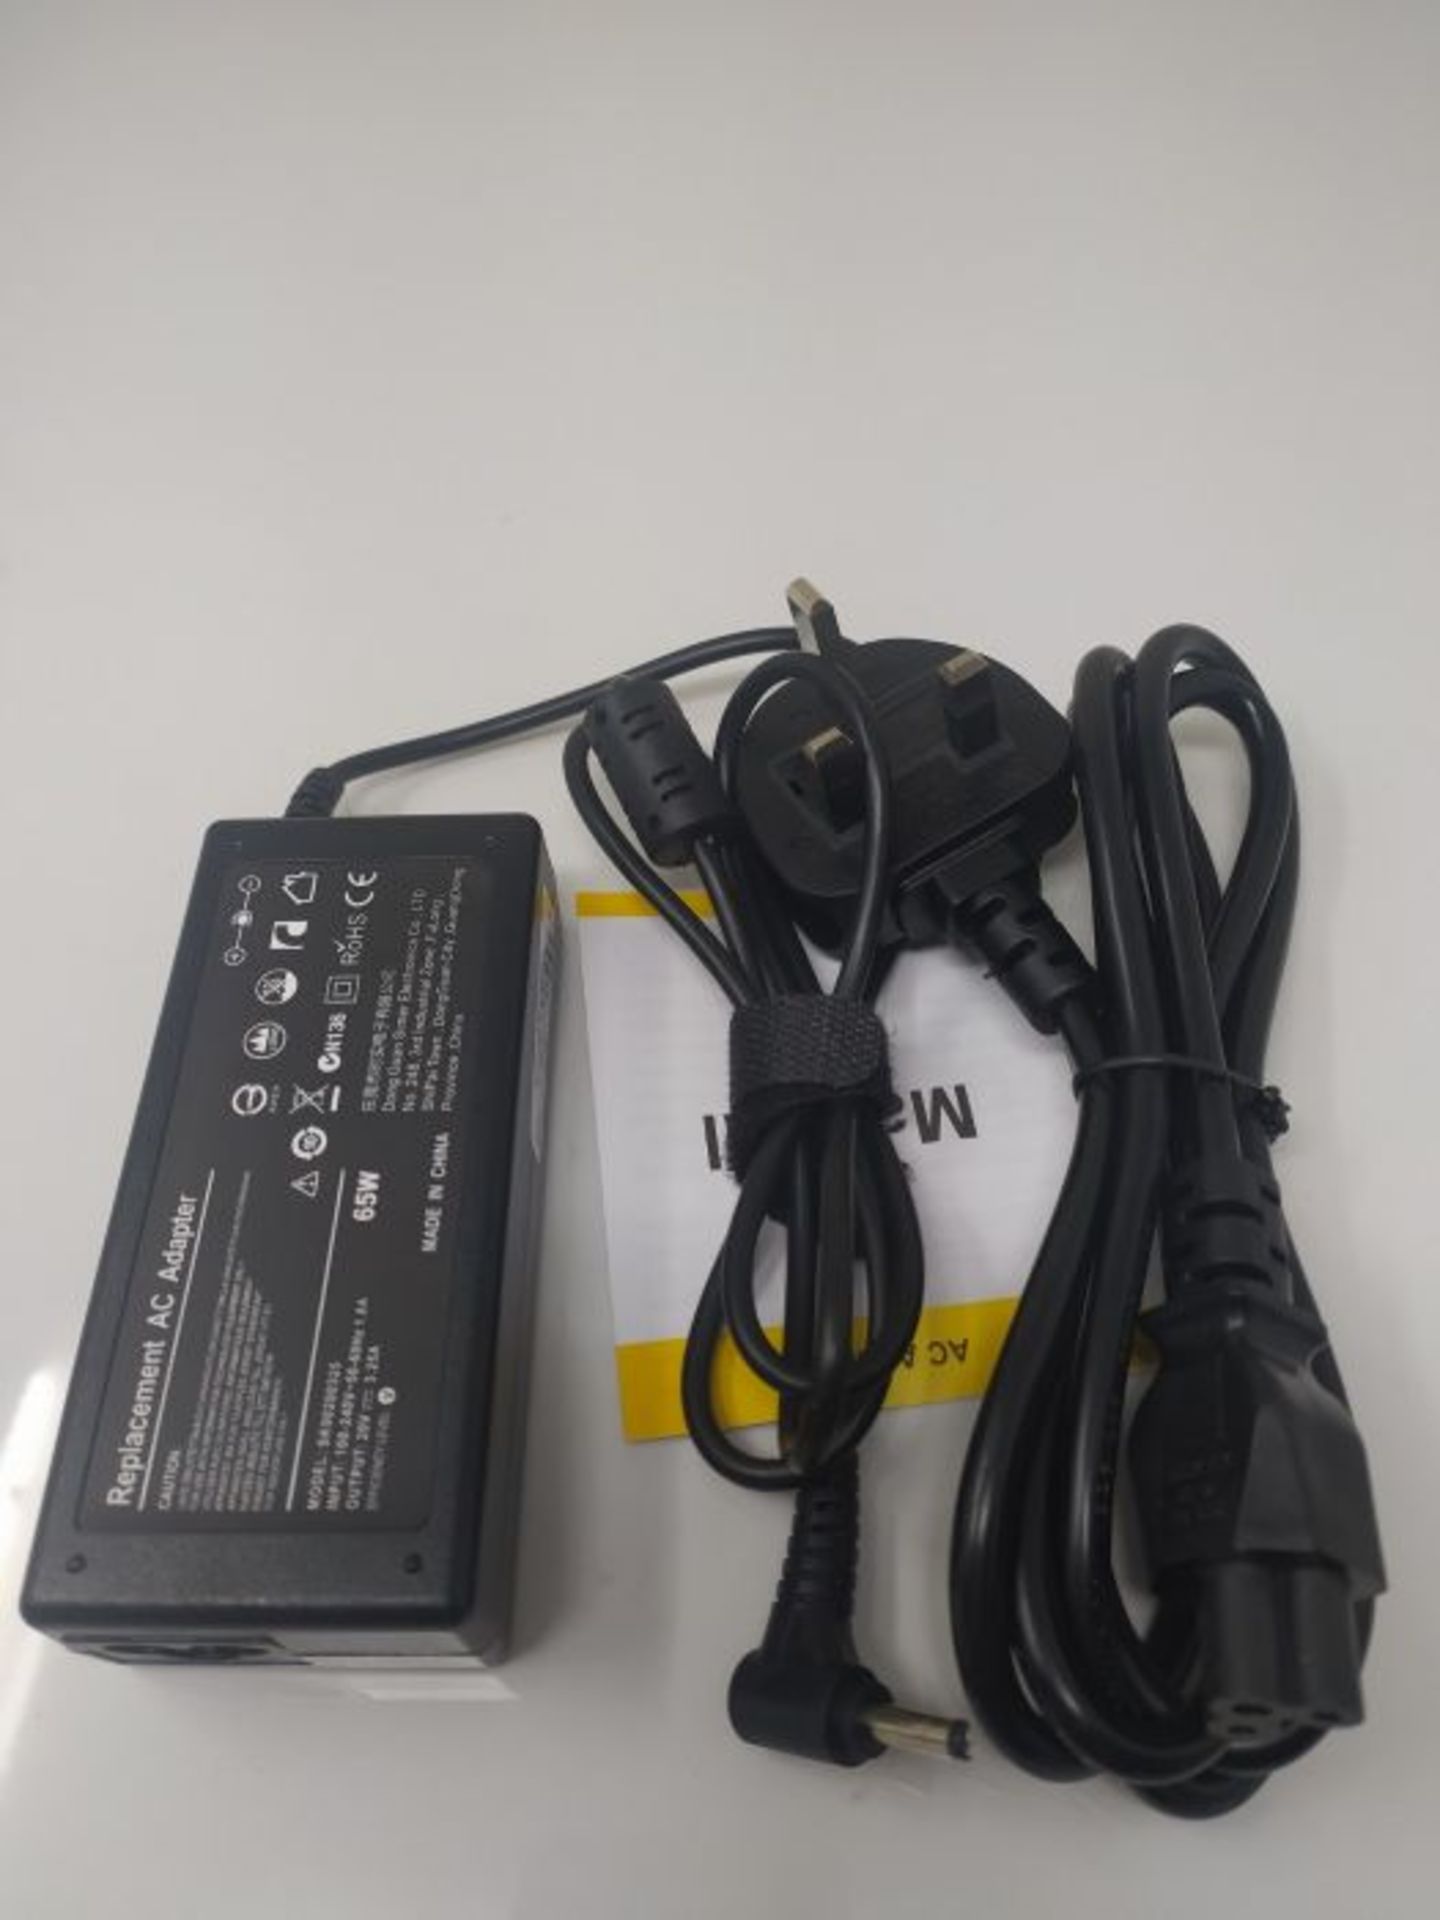 65W AC Adapter Laptop Charger for Lenovo Ideapad 310 320 330 310S 320S 330S 510 510S 5 - Image 2 of 2